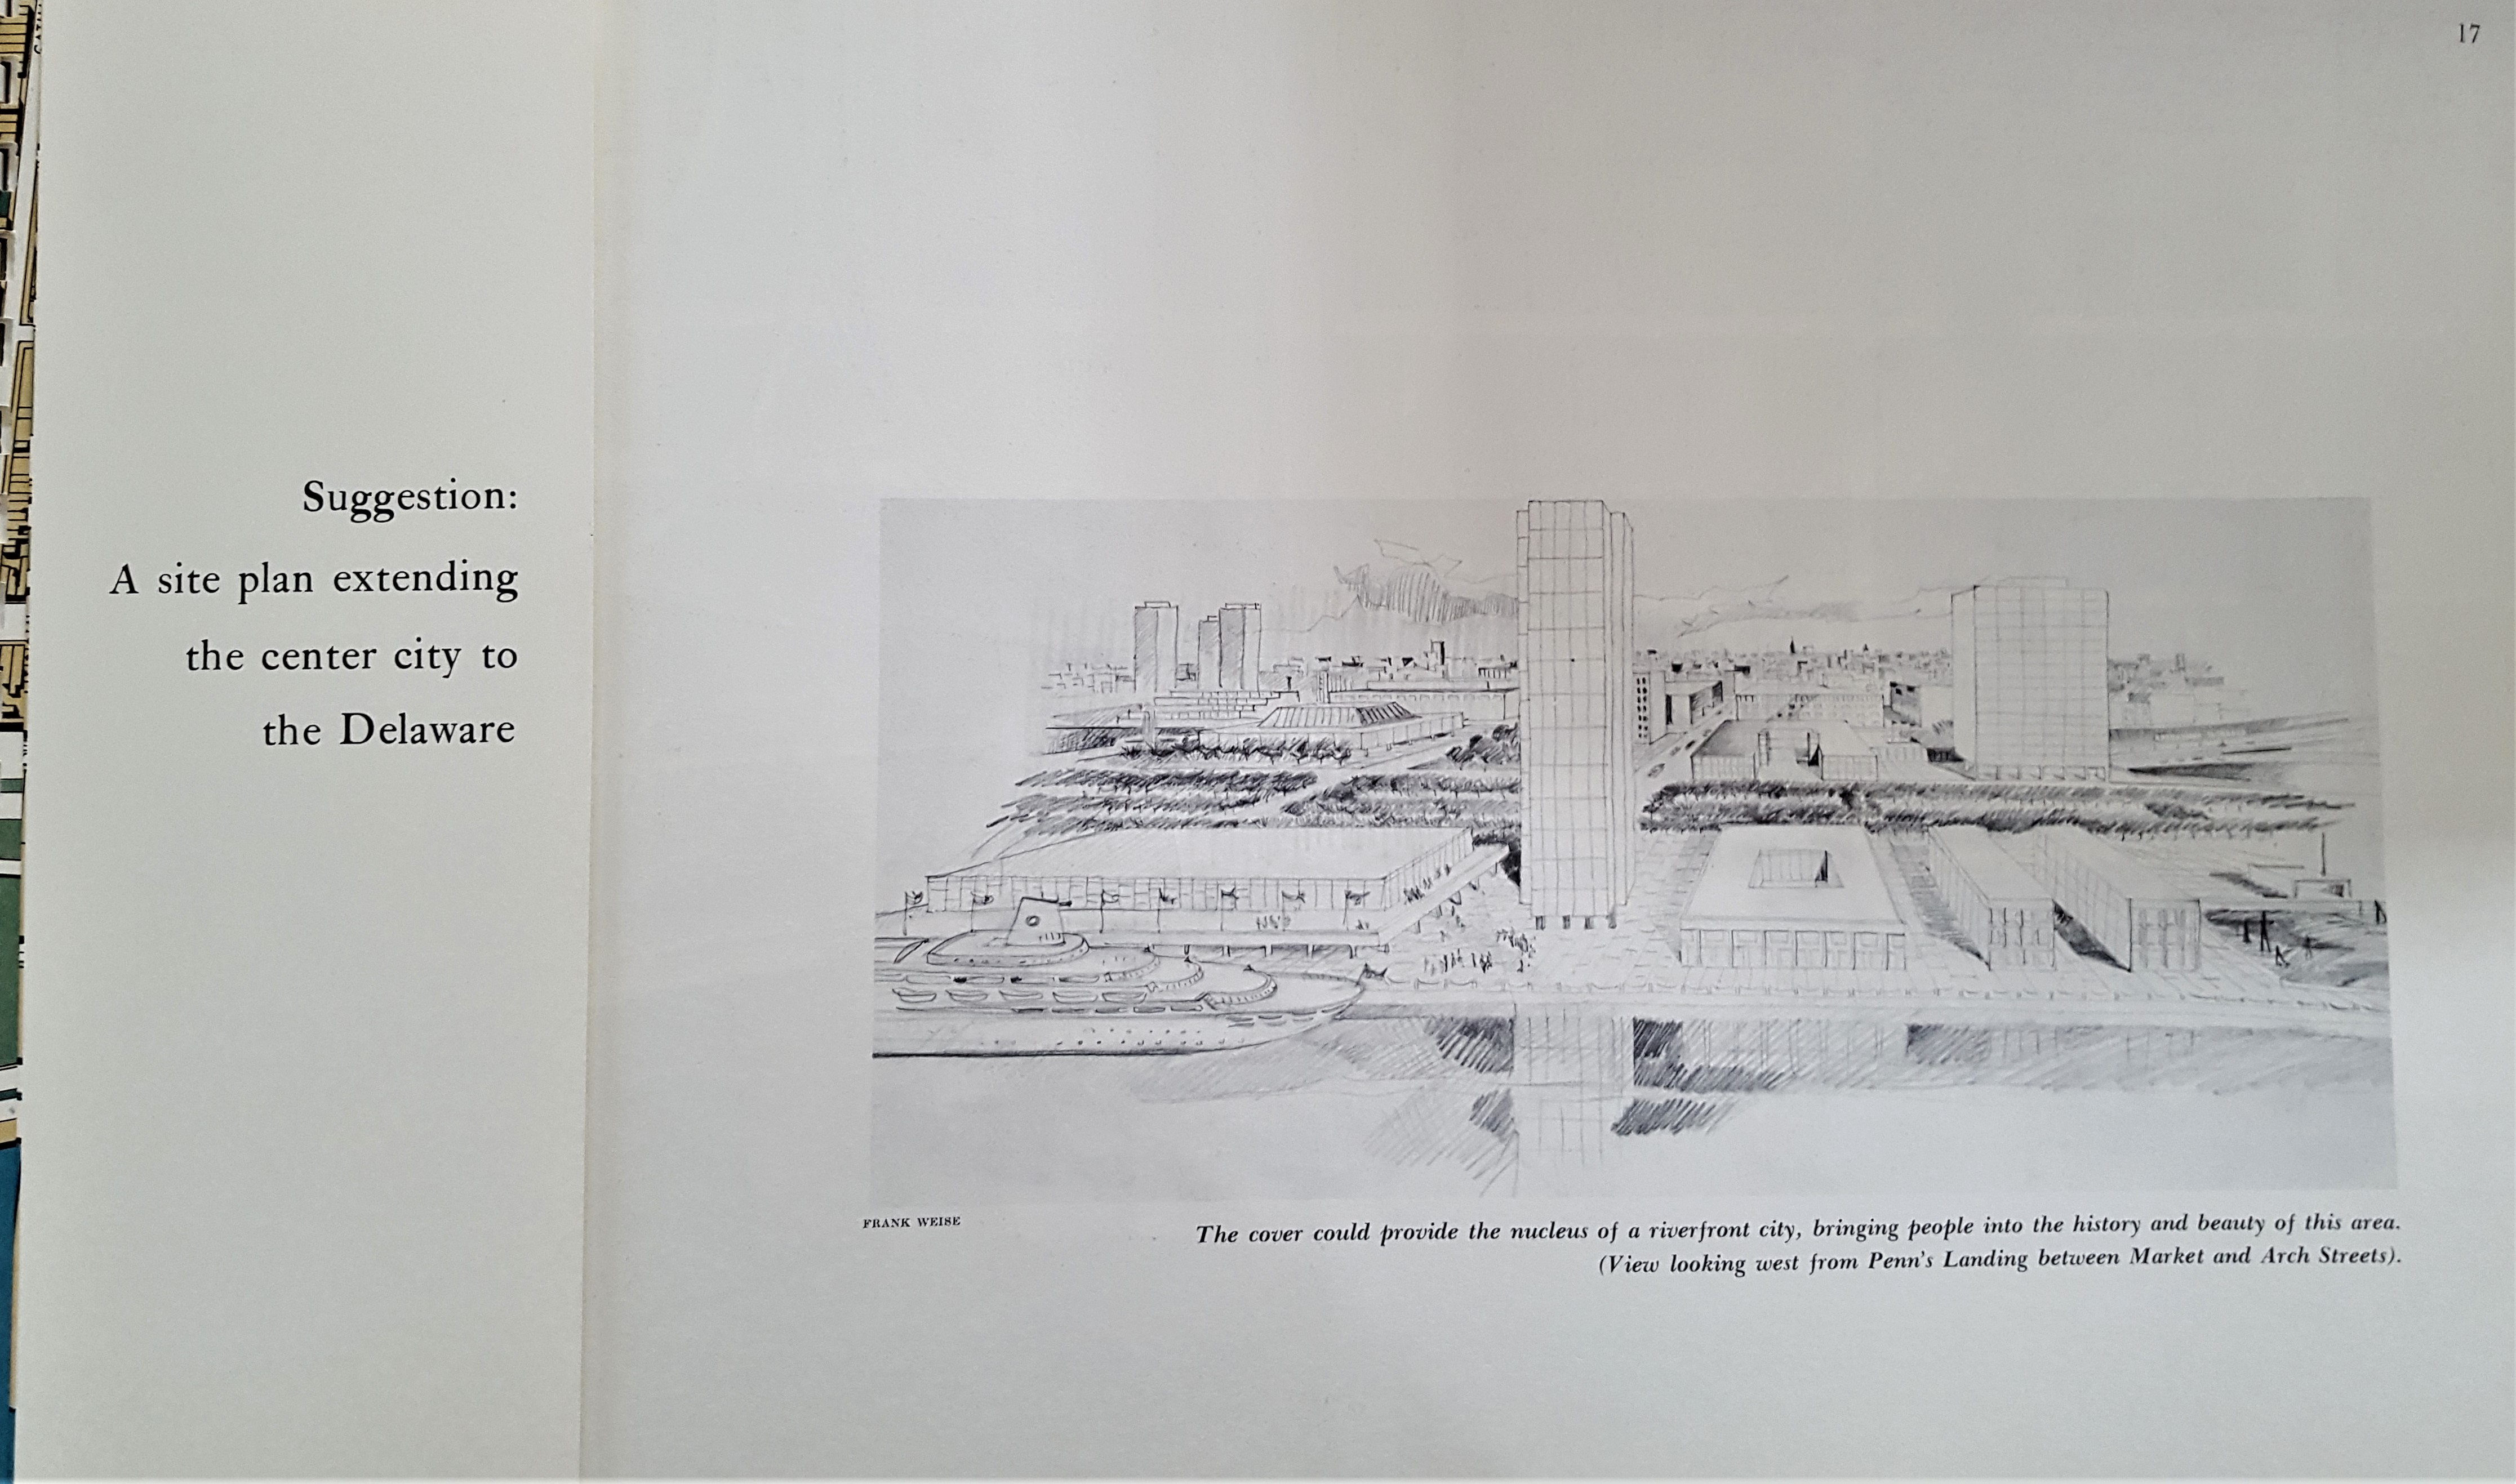 Architectural drawing showing role of cover in connecting the city core and its streets to the waterfront